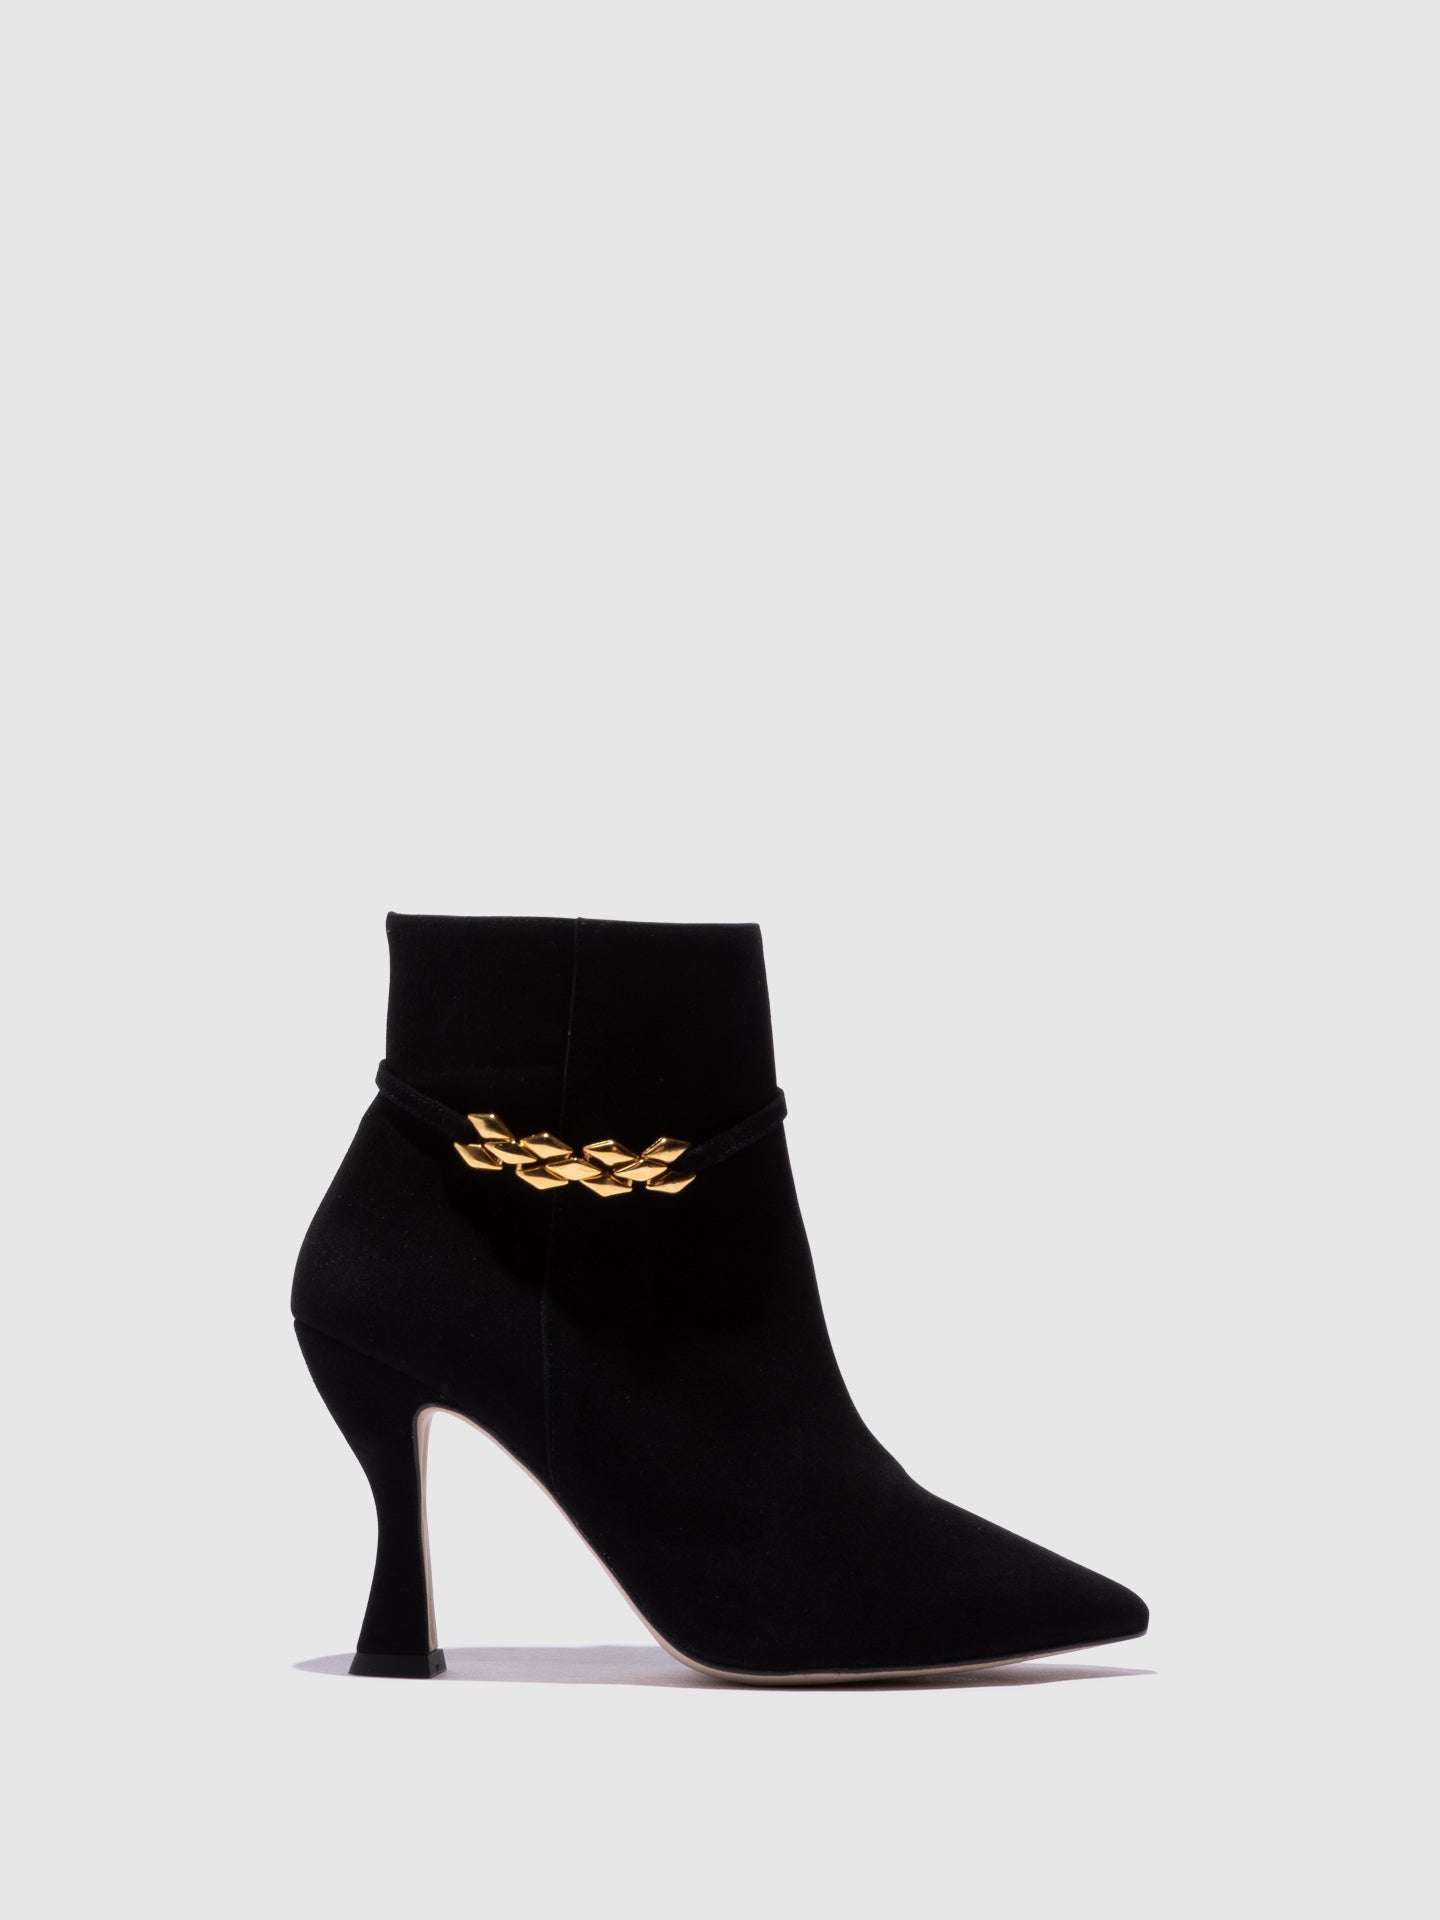 Sofia Costa Black Zip Up Ankle Boots